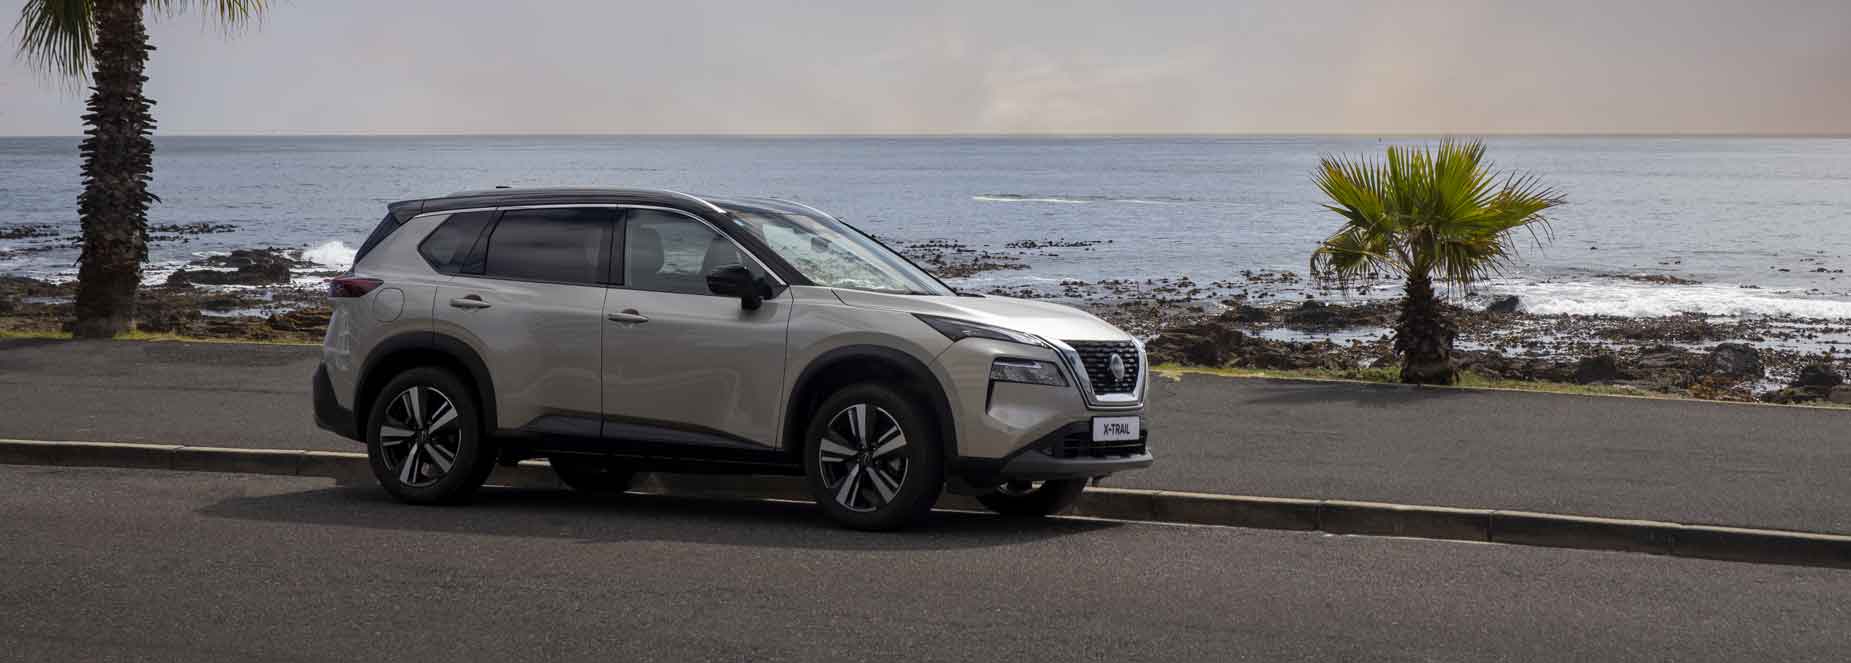 New Nissan X-Trail goes on sale